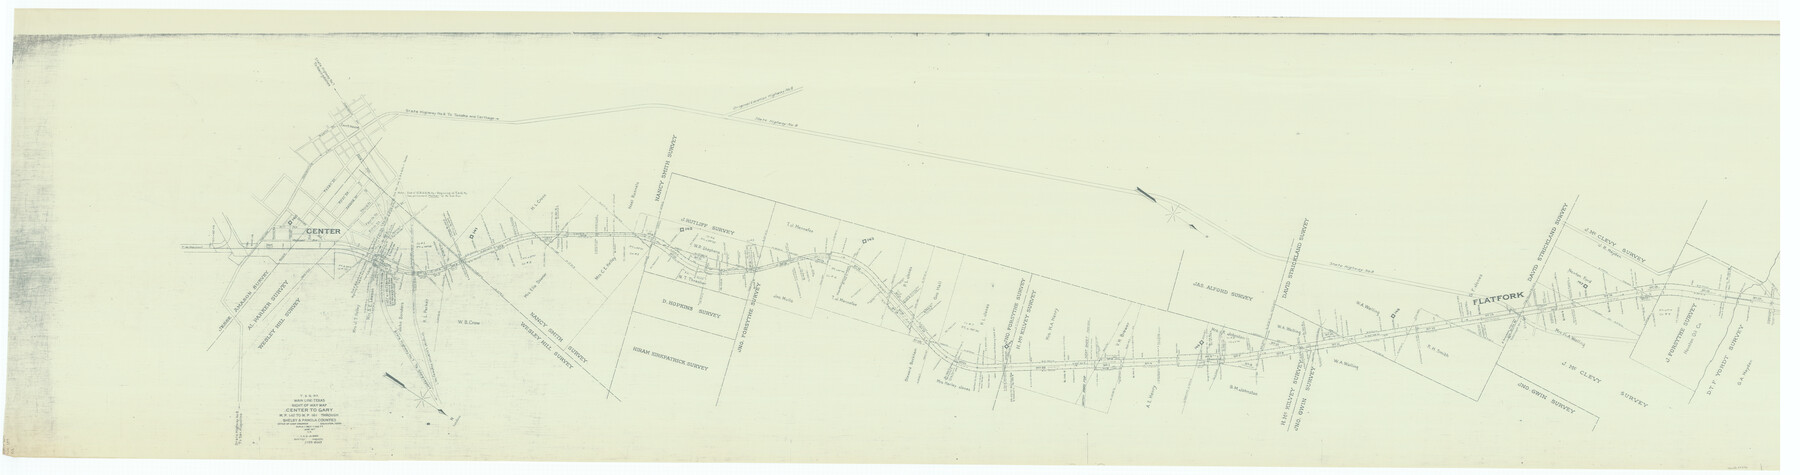 64570, T. & G. Ry. Main Line, Texas, Right of Way Map, Center to Gary, General Map Collection